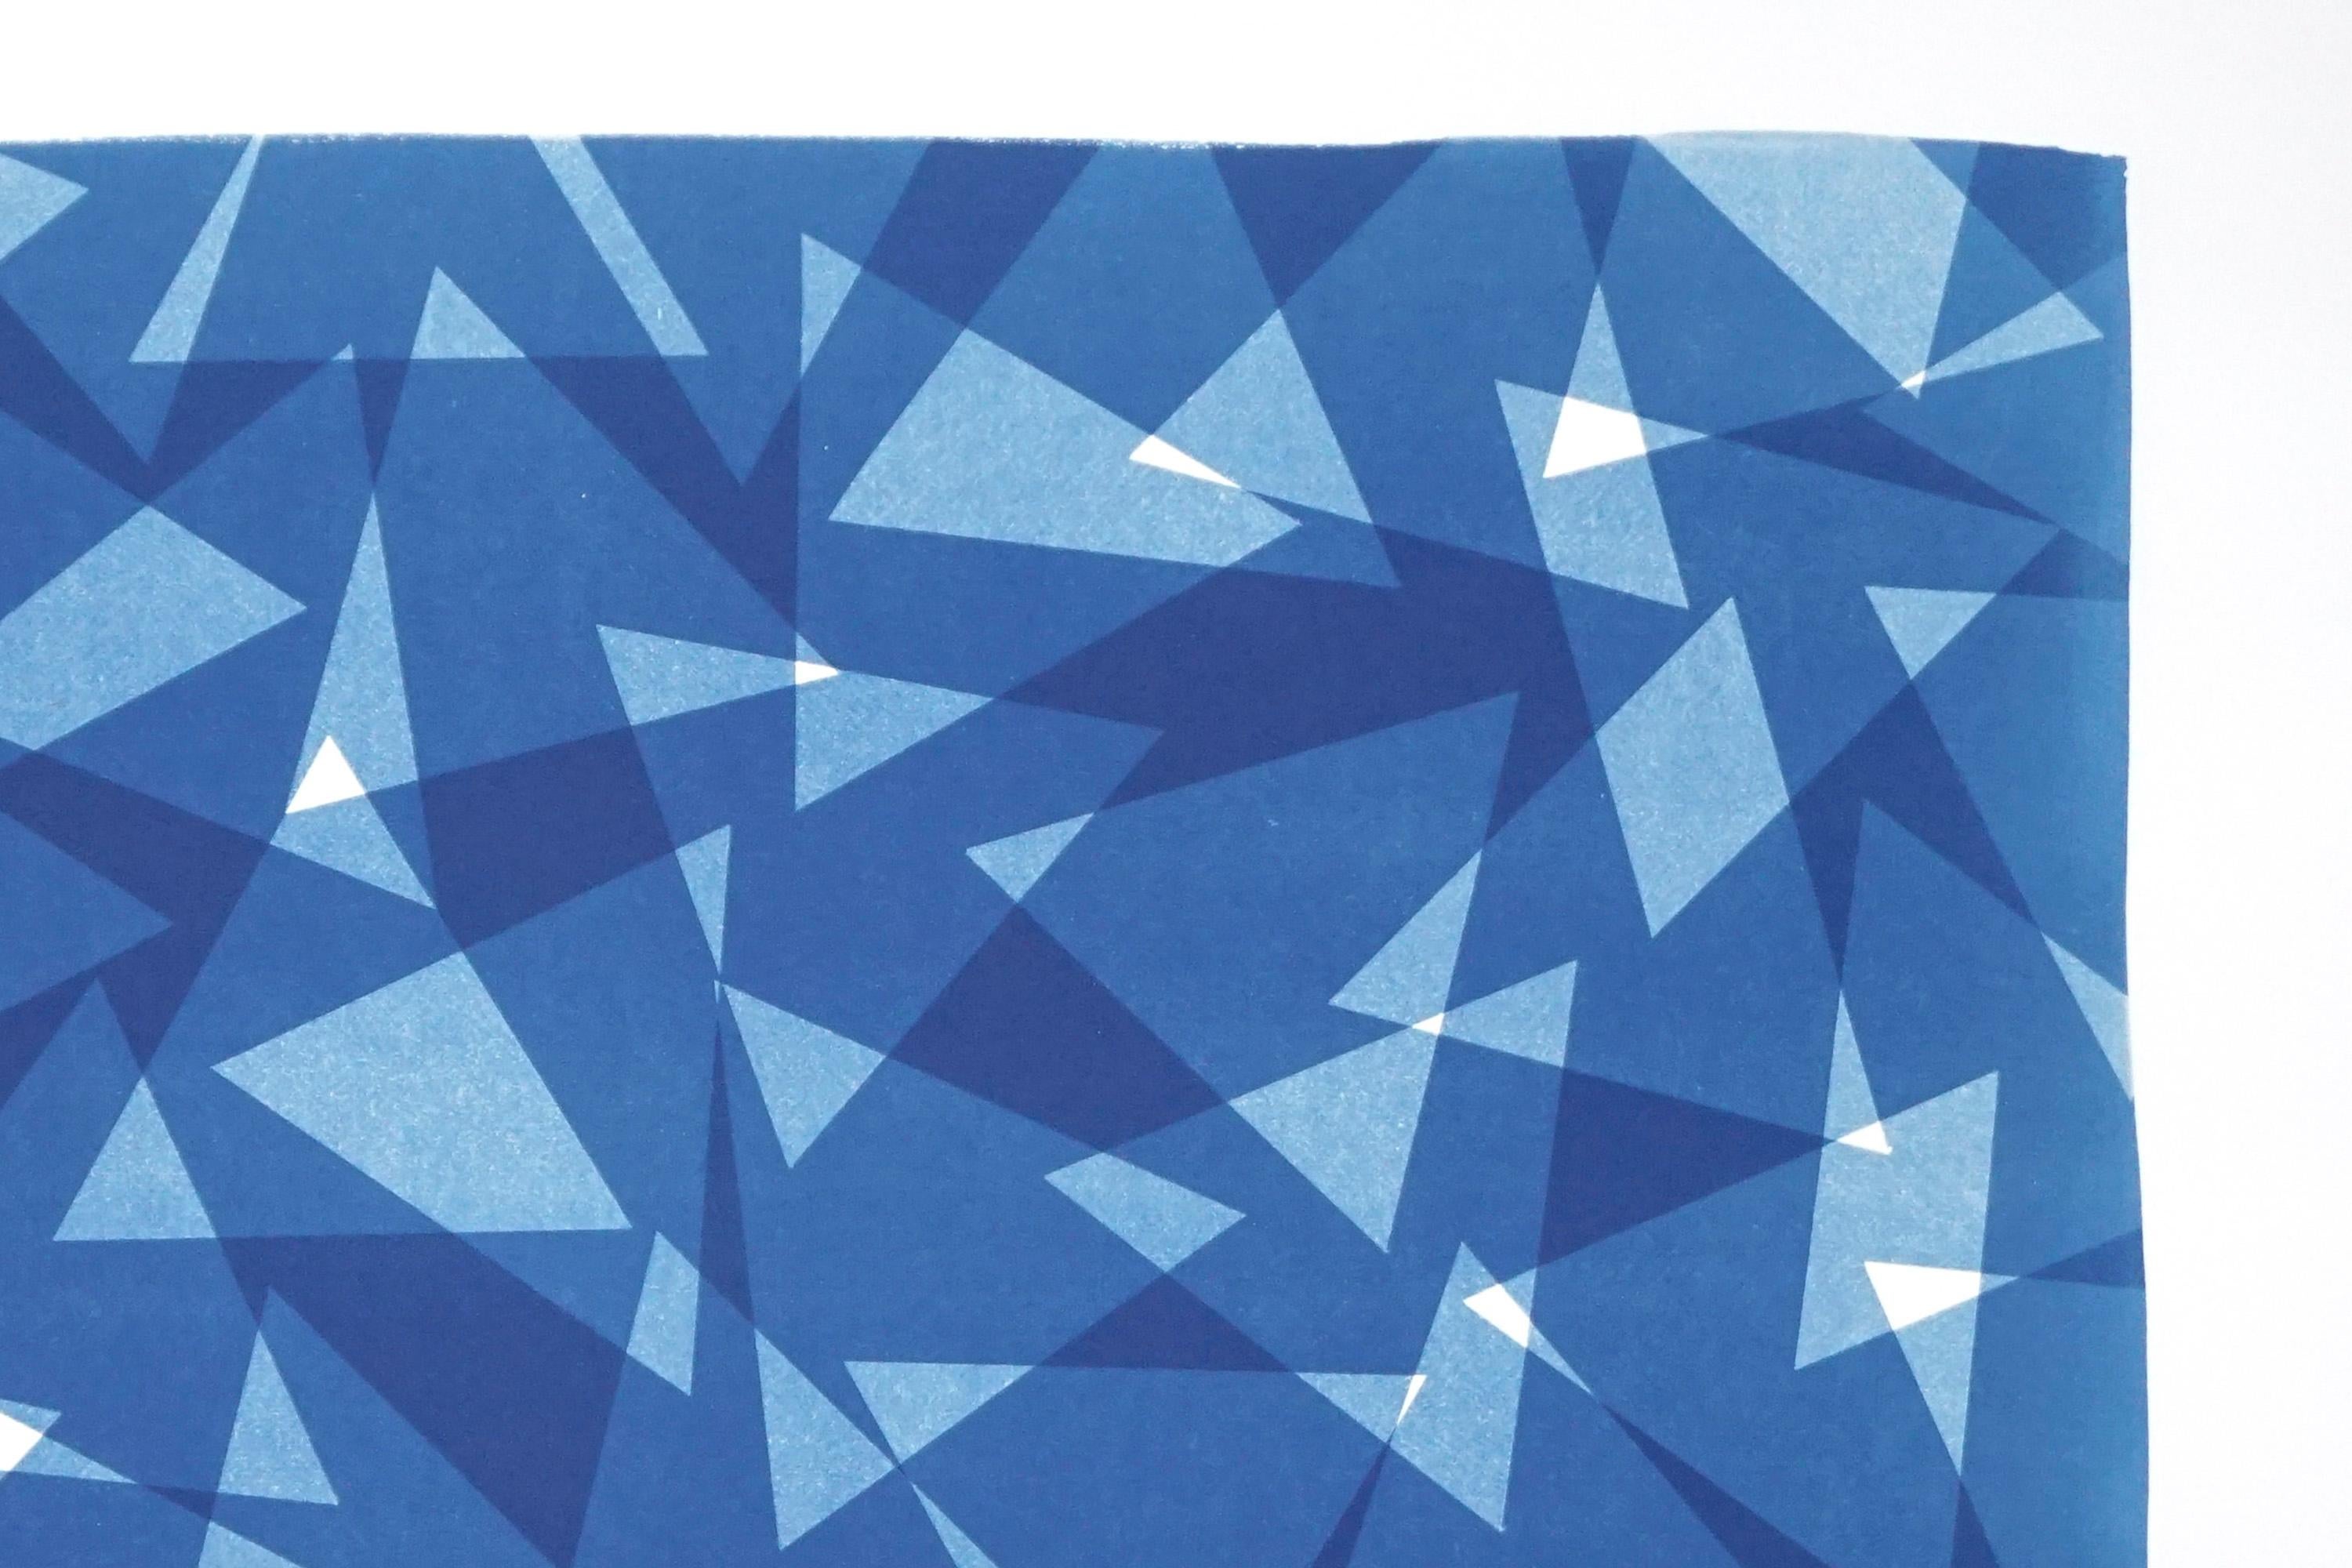 Geometric Triangles Pattern, Cutout Layer Paper Cyanotype in Blue, Naif Shapes  - Abstract Geometric Print by Kind of Cyan